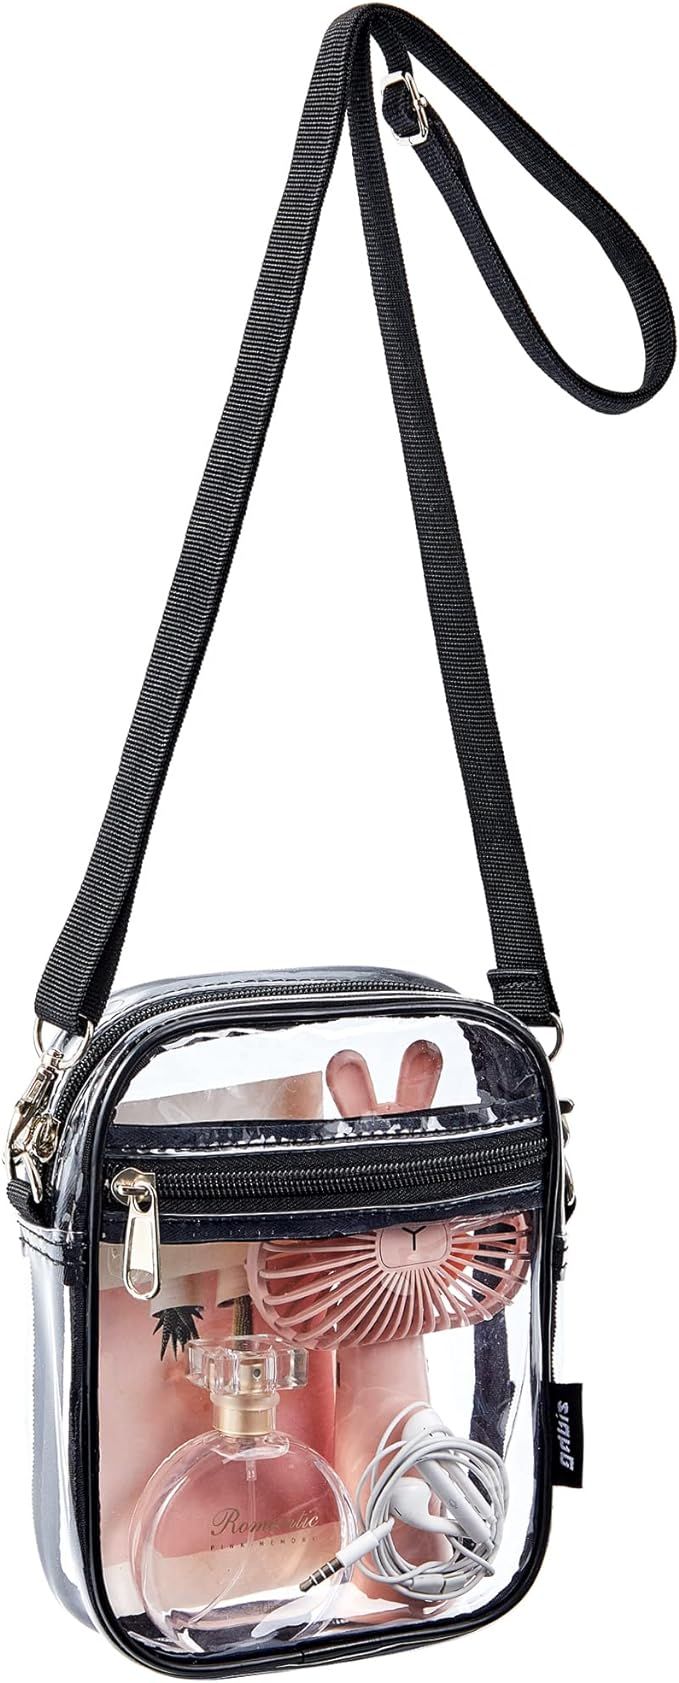 Clear Crossbody Bag, Stadium Approved Clear Purse Bag for Concerts Sports Events | Amazon (US)